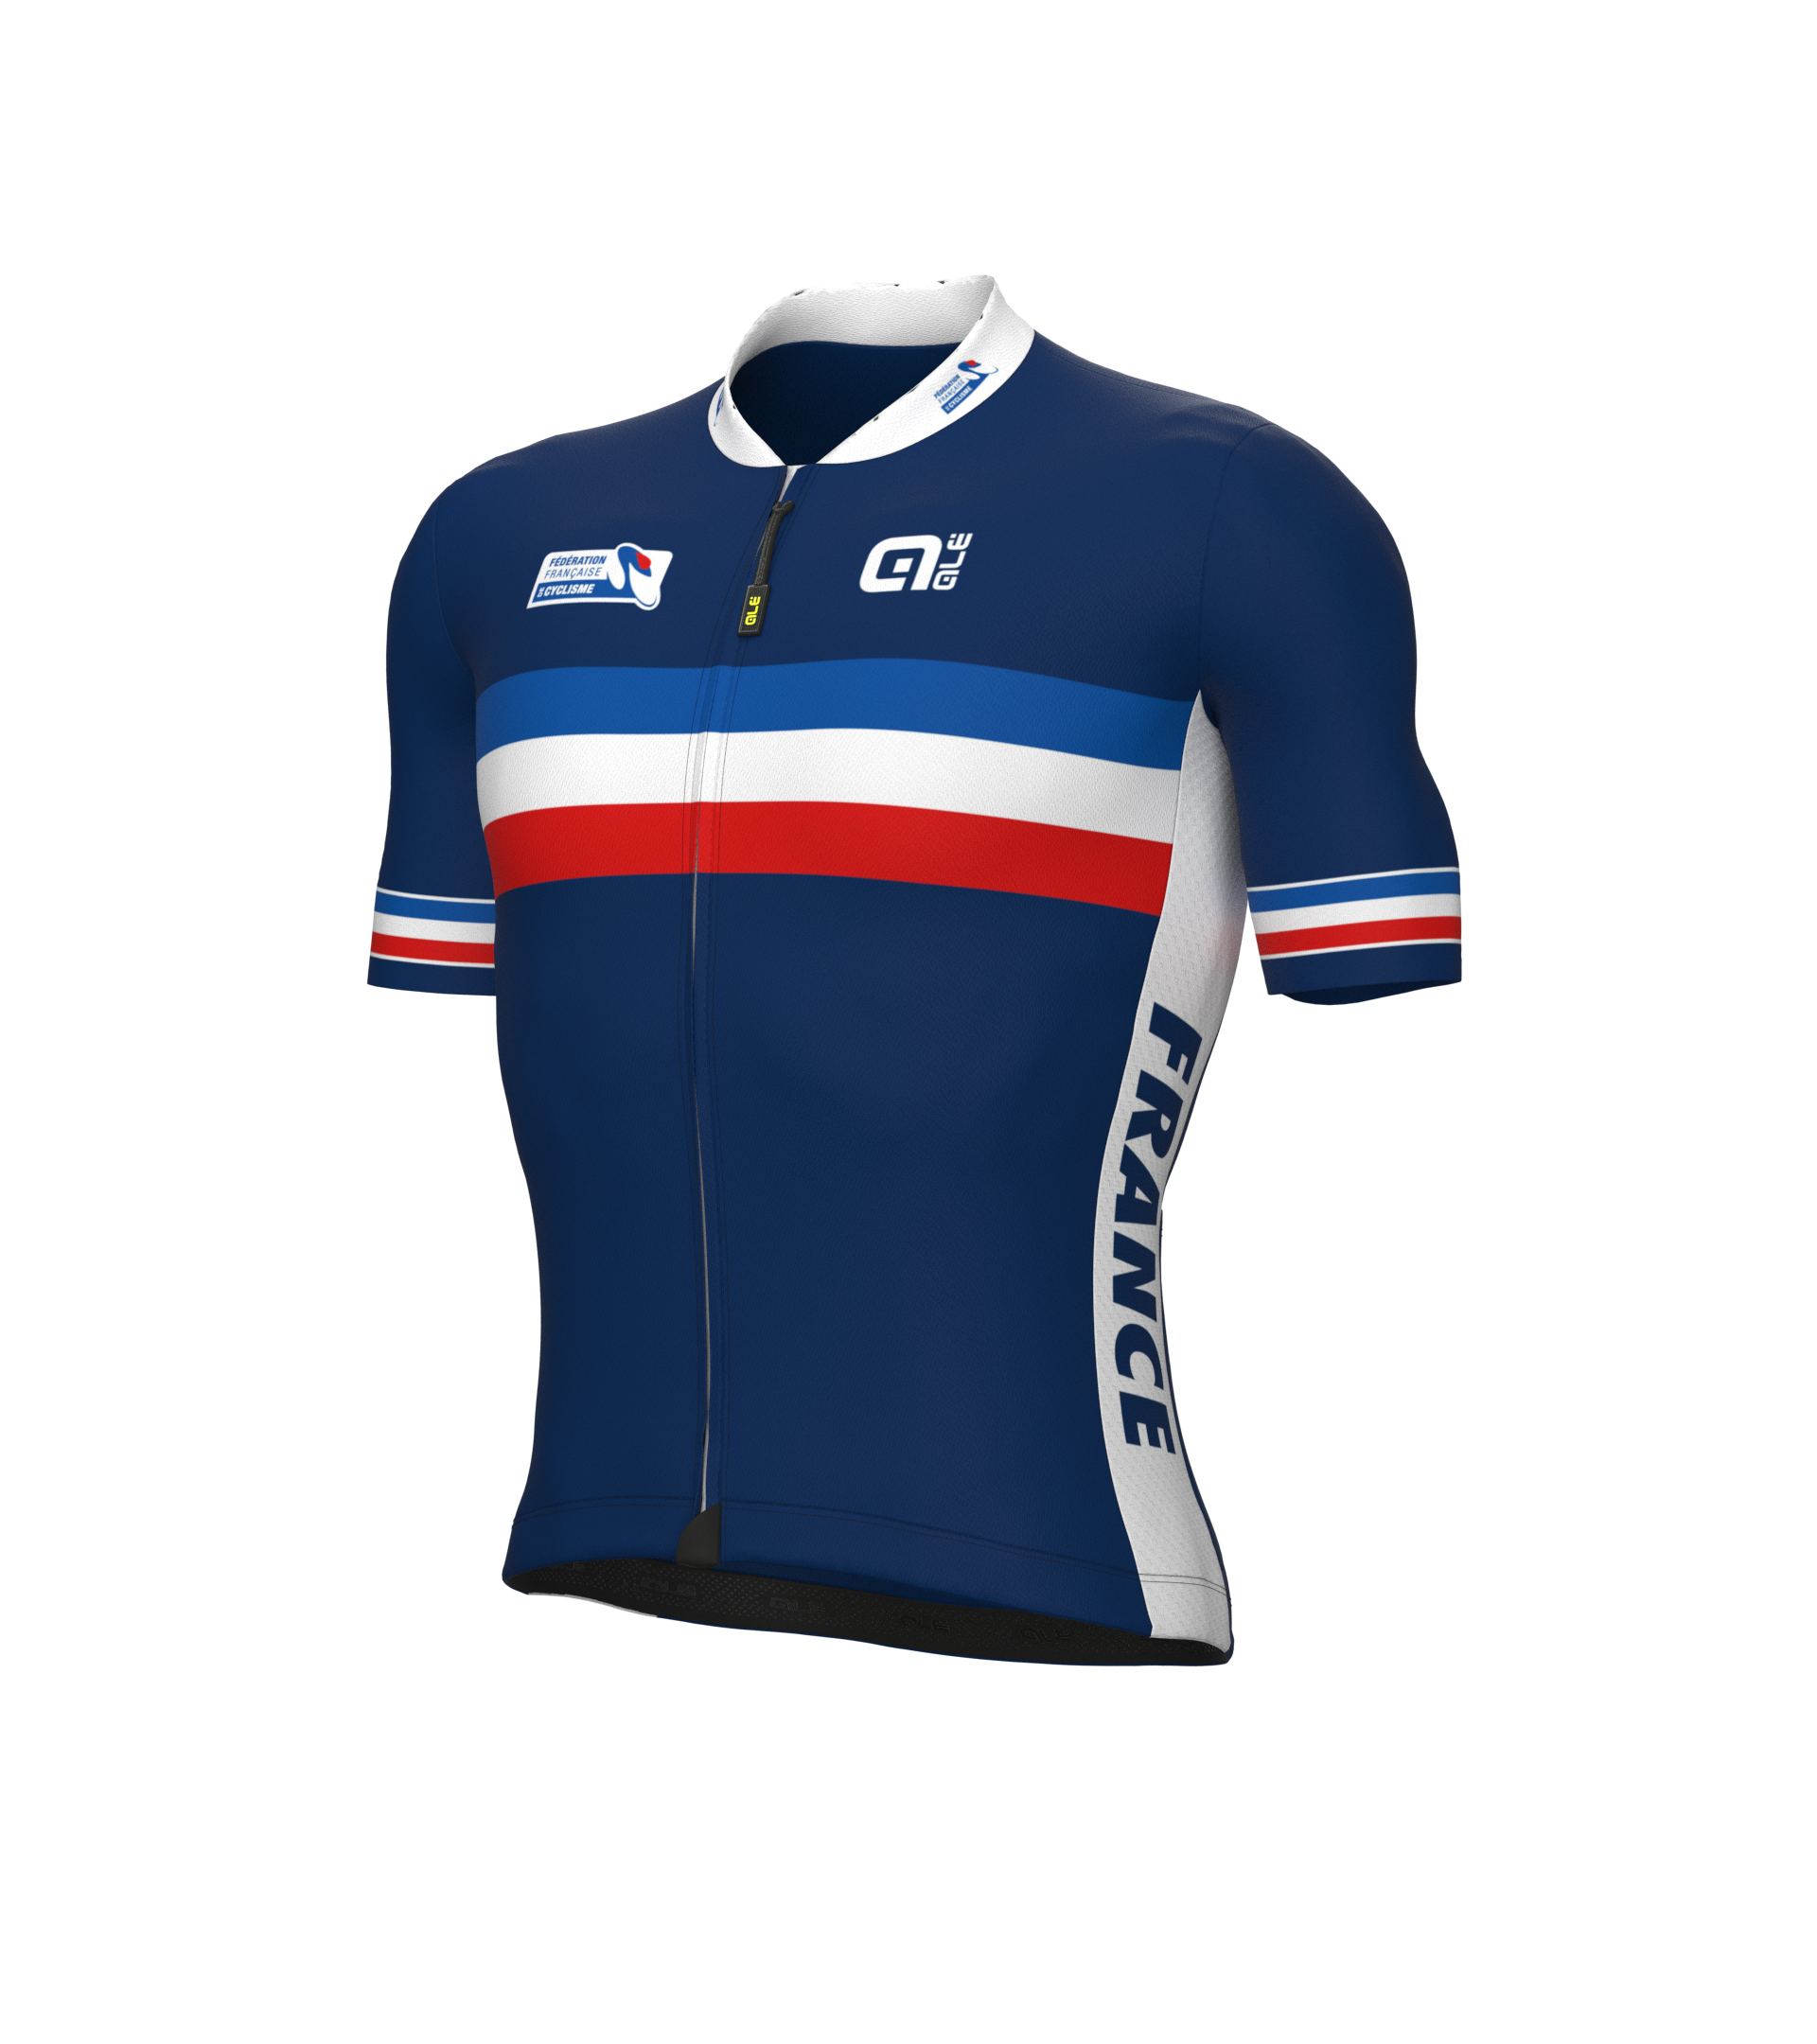 Alé Team Prime French Cycling Federation jersey LordGun online bike store